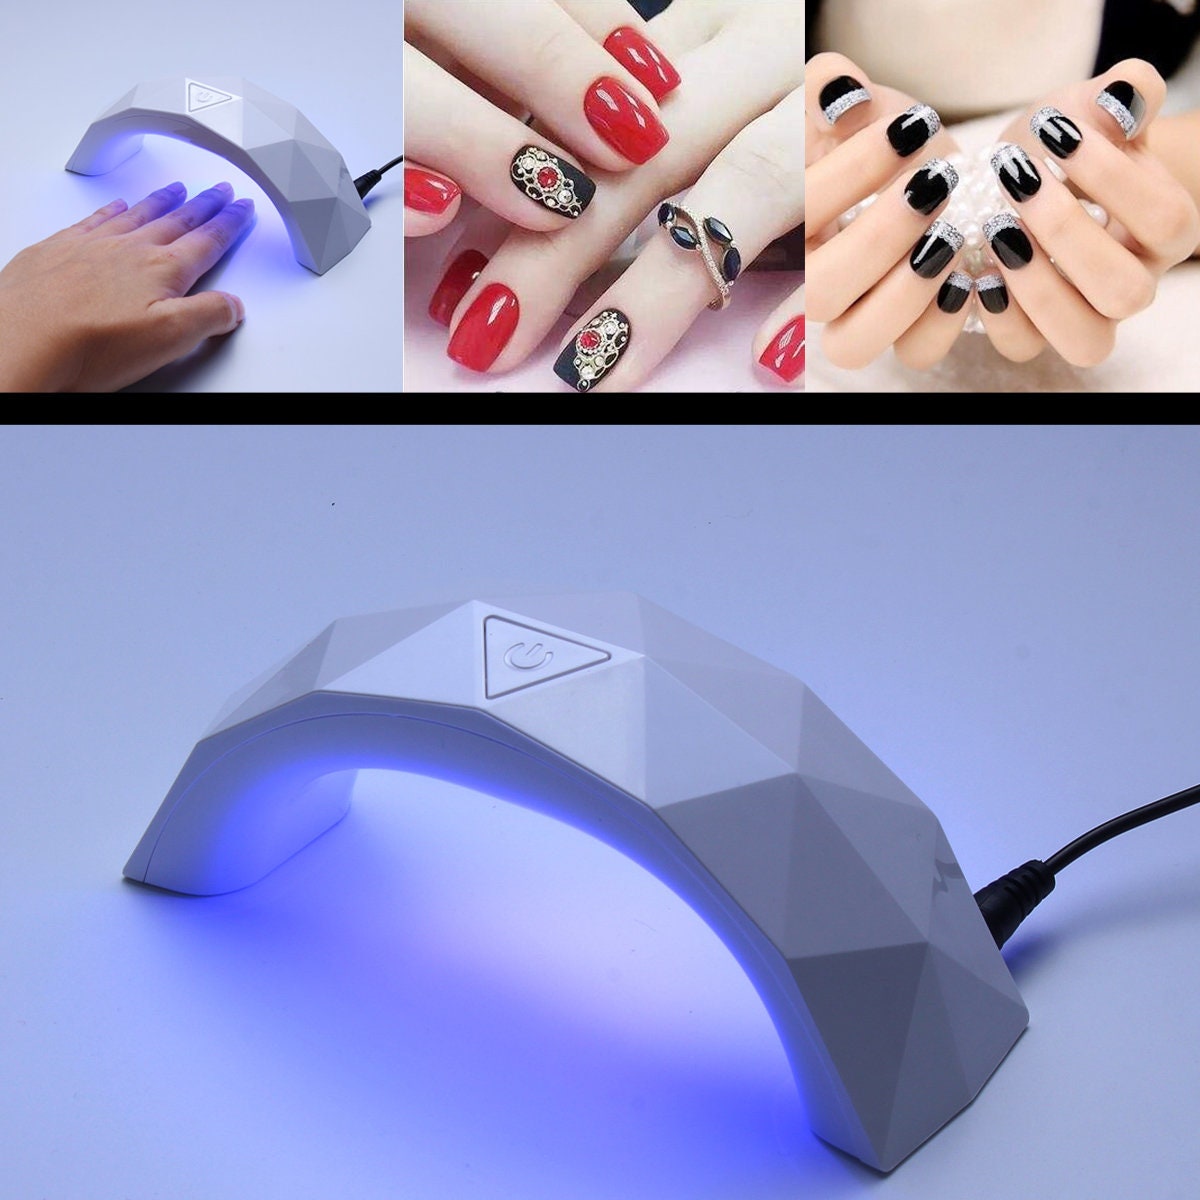 How to Use a Nail Lamp for Your Gel Polish Manicure - MEP 14 Blogs